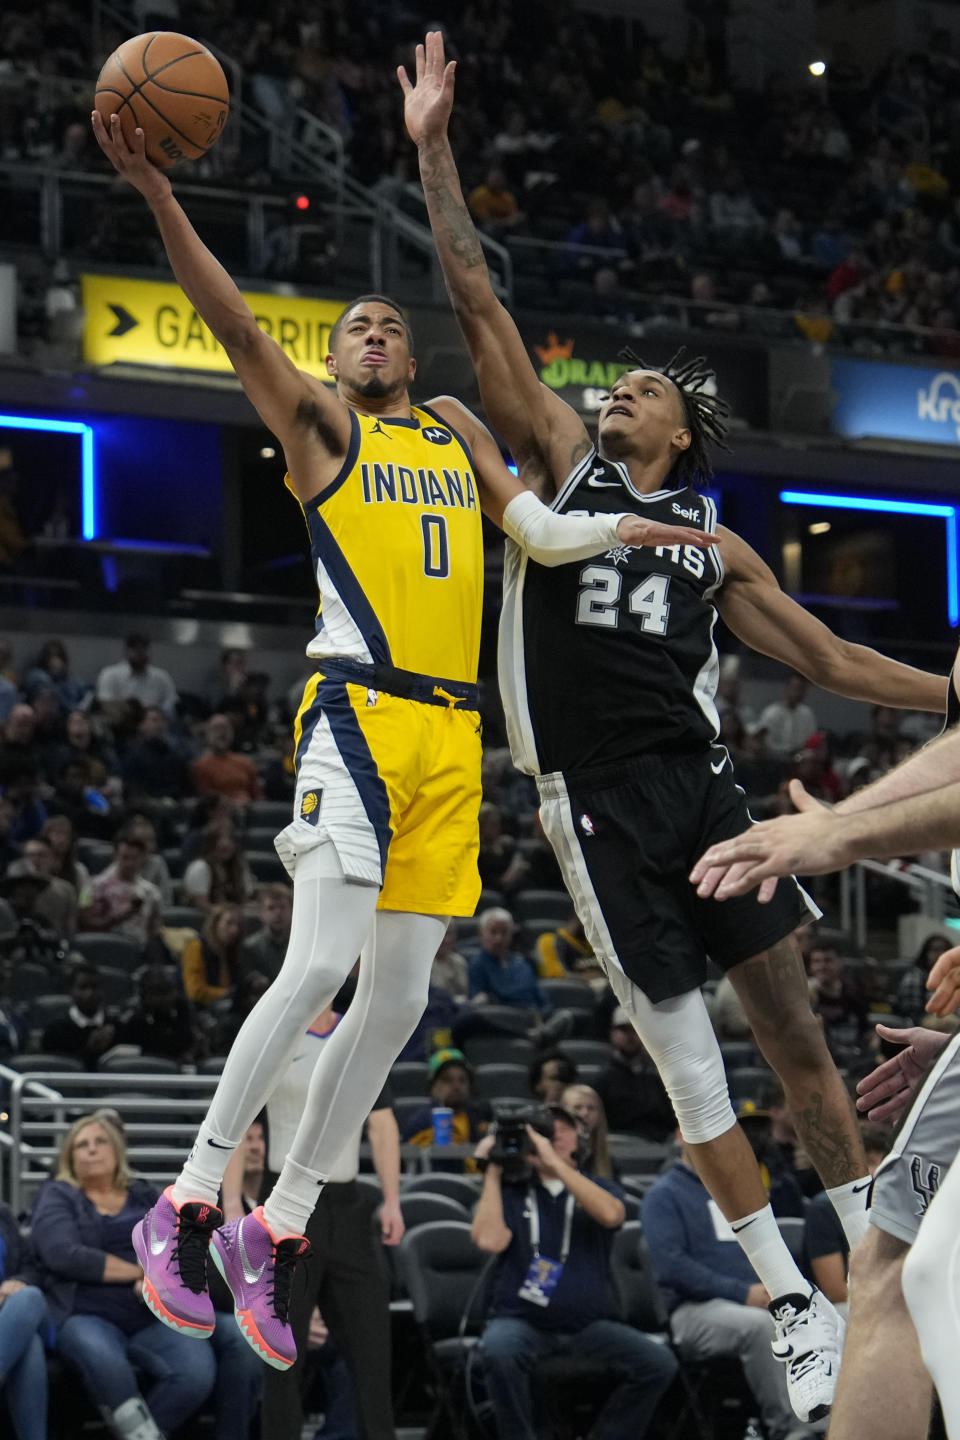 Indiana Pacers guard Tyrese Haliburton (0) shoots under the defense of San Antonio Spurs guard Devin Vassell (24) during the second half of an NBA basketball game in Indianapolis, Friday, Oct. 21, 2022. (AP Photo/AJ Mast)